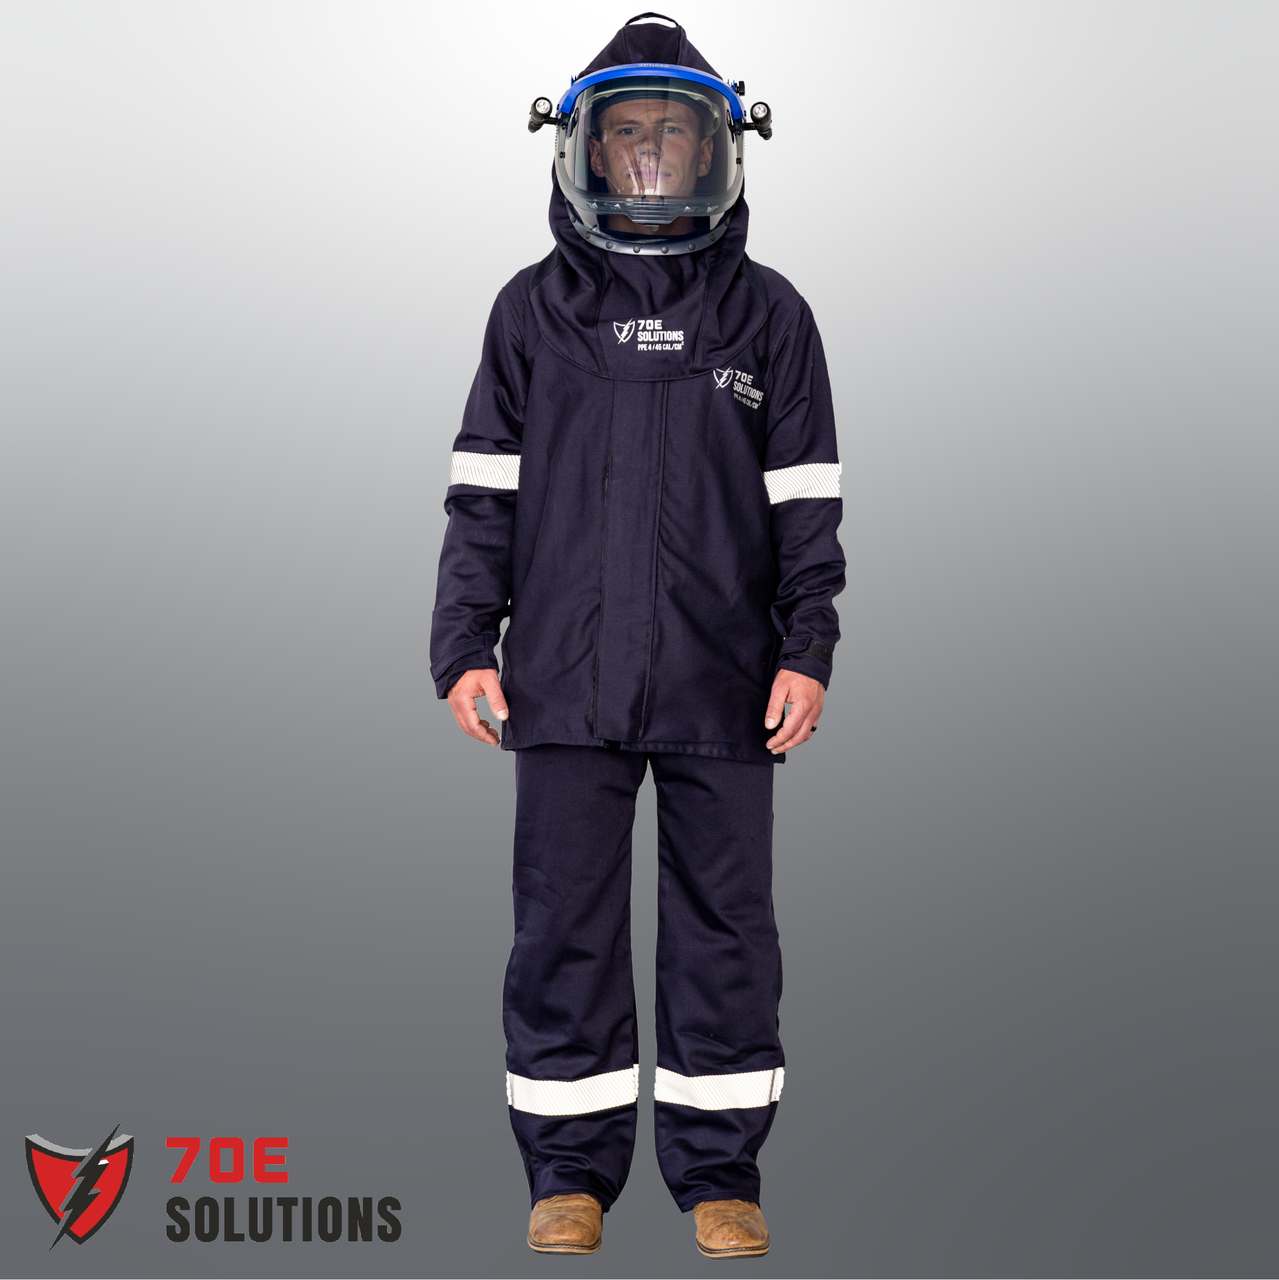 Arc Flash Suit: Choosing the Right Protective Gear